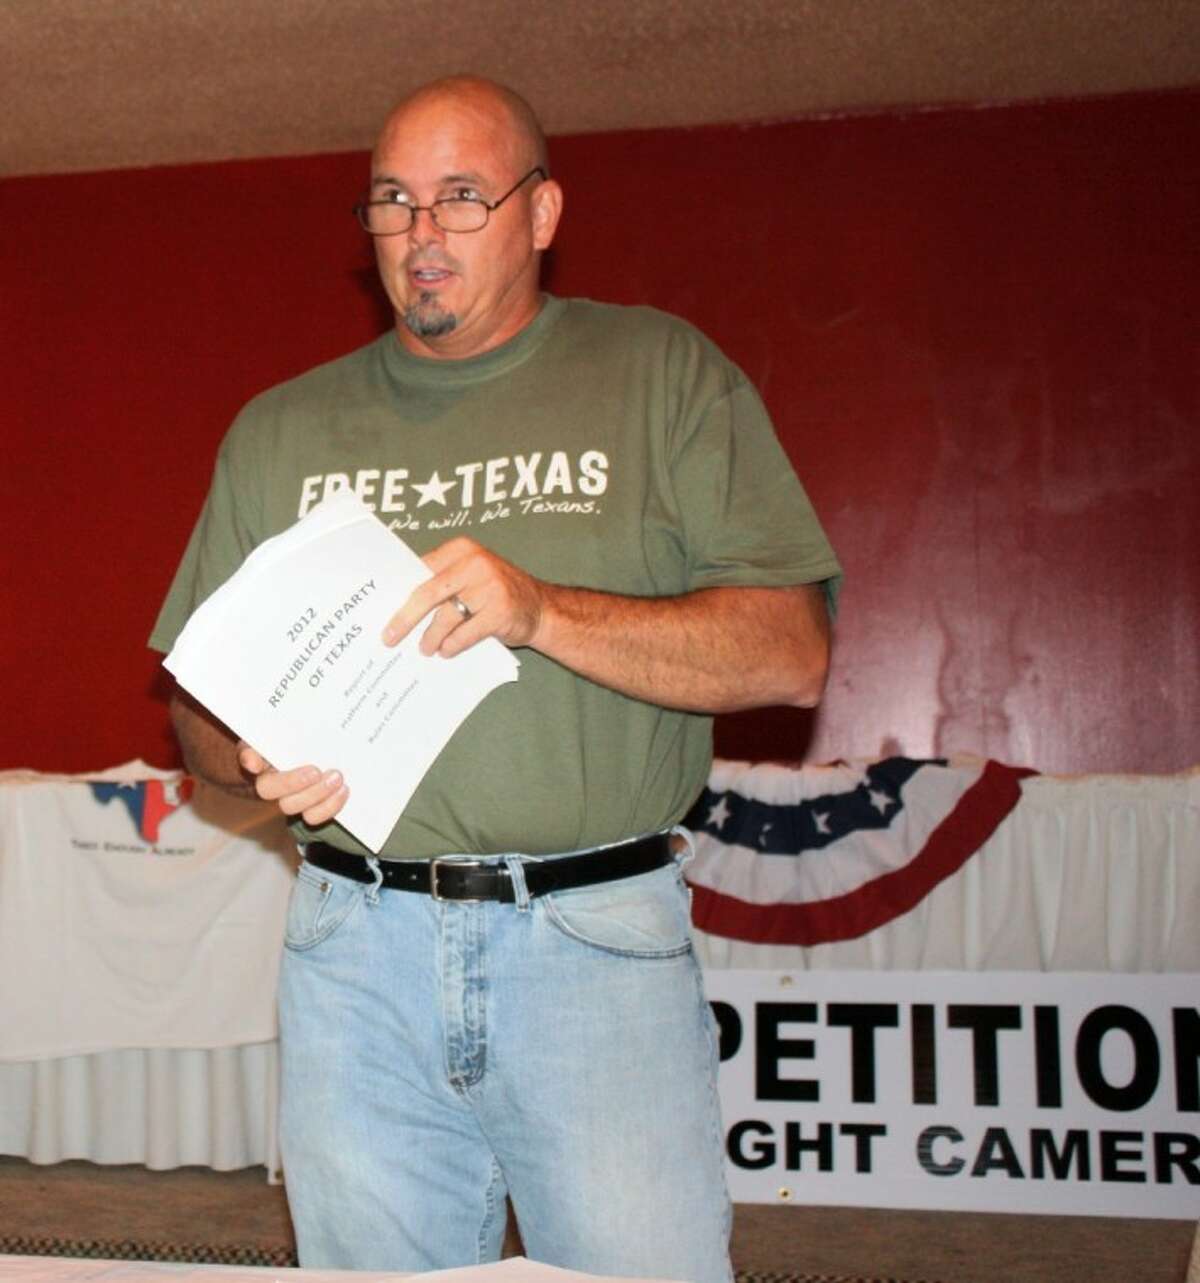 State Republican Convention delegate Dwayne Stovall voiced his concern at the Tri-County Texas Tea Party that the GOP’s plan for a temporary worker program for illegal aliens is the beginning of amnesty.